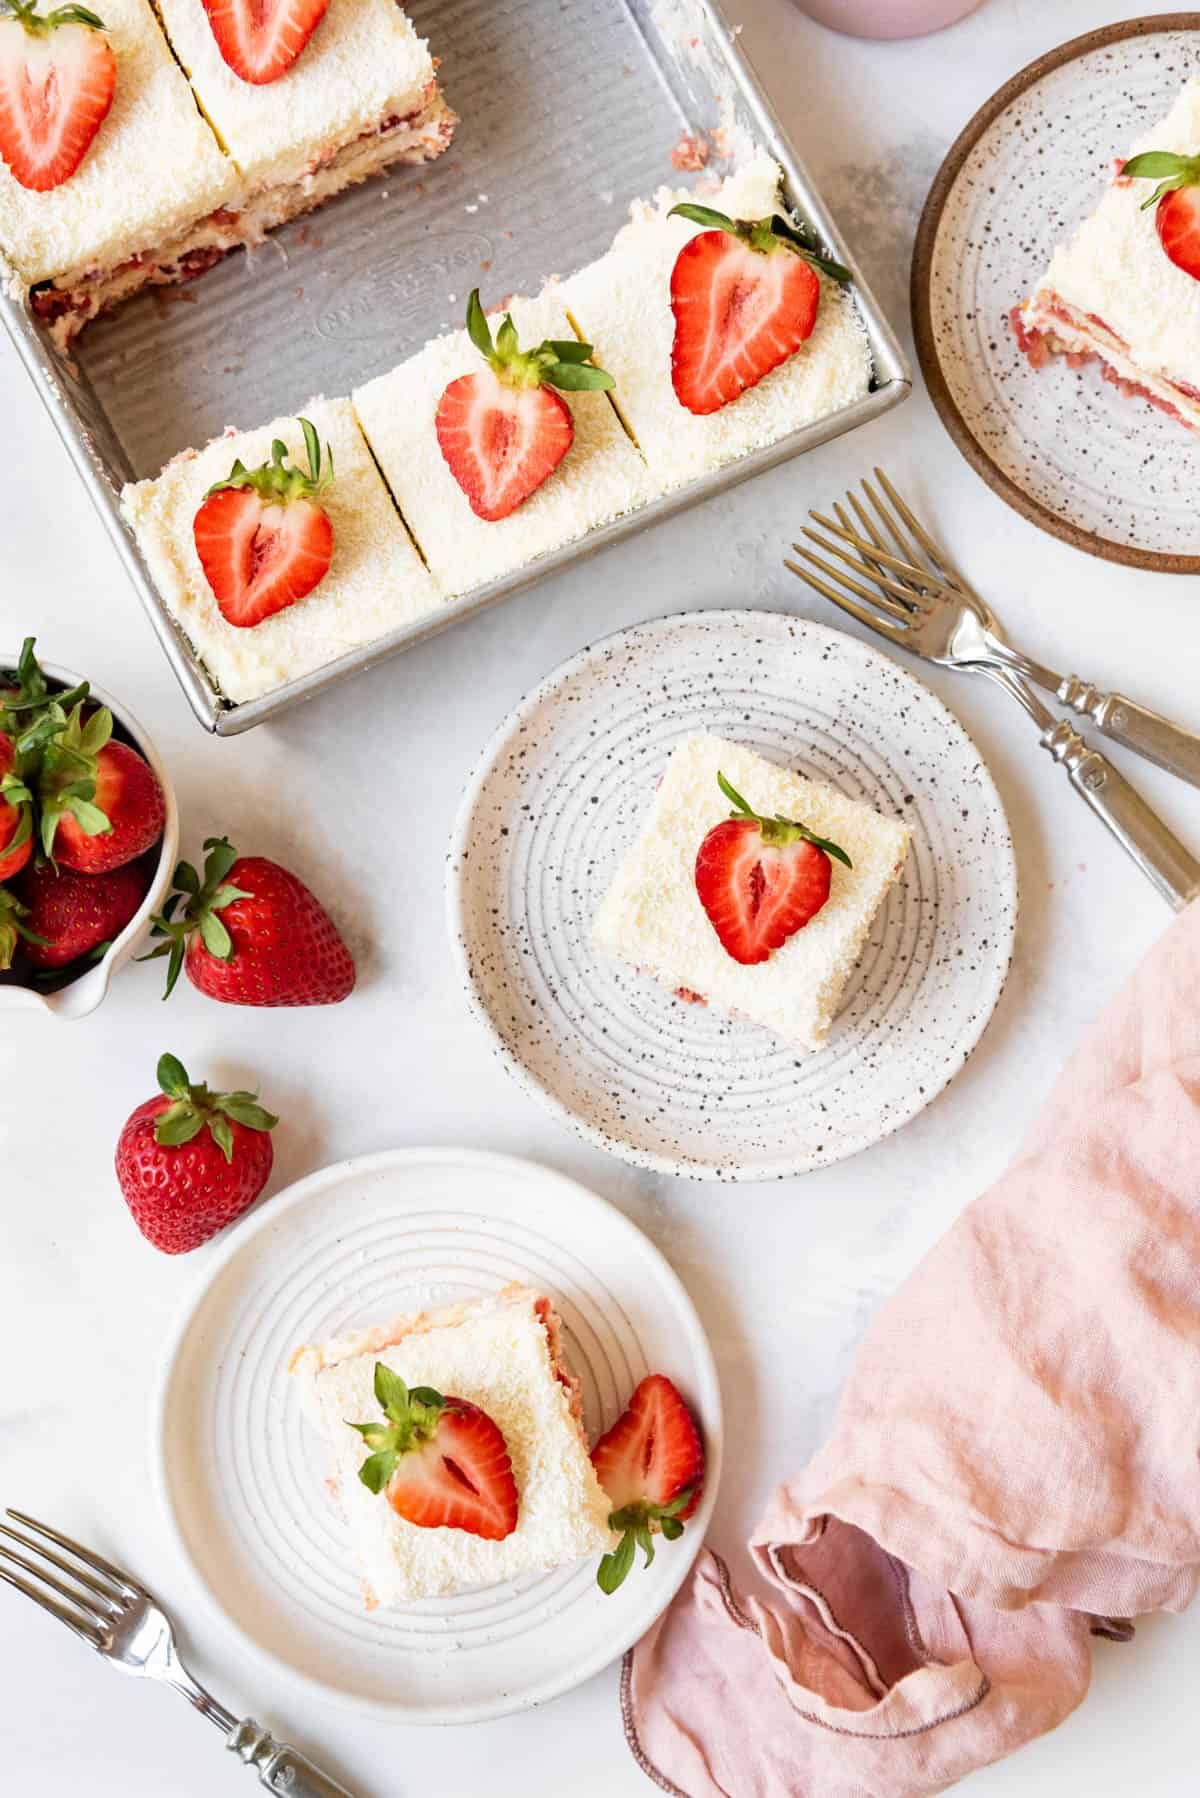 An overhead image of slices of strawberry tiramisu on plates with strawberry halves on top.